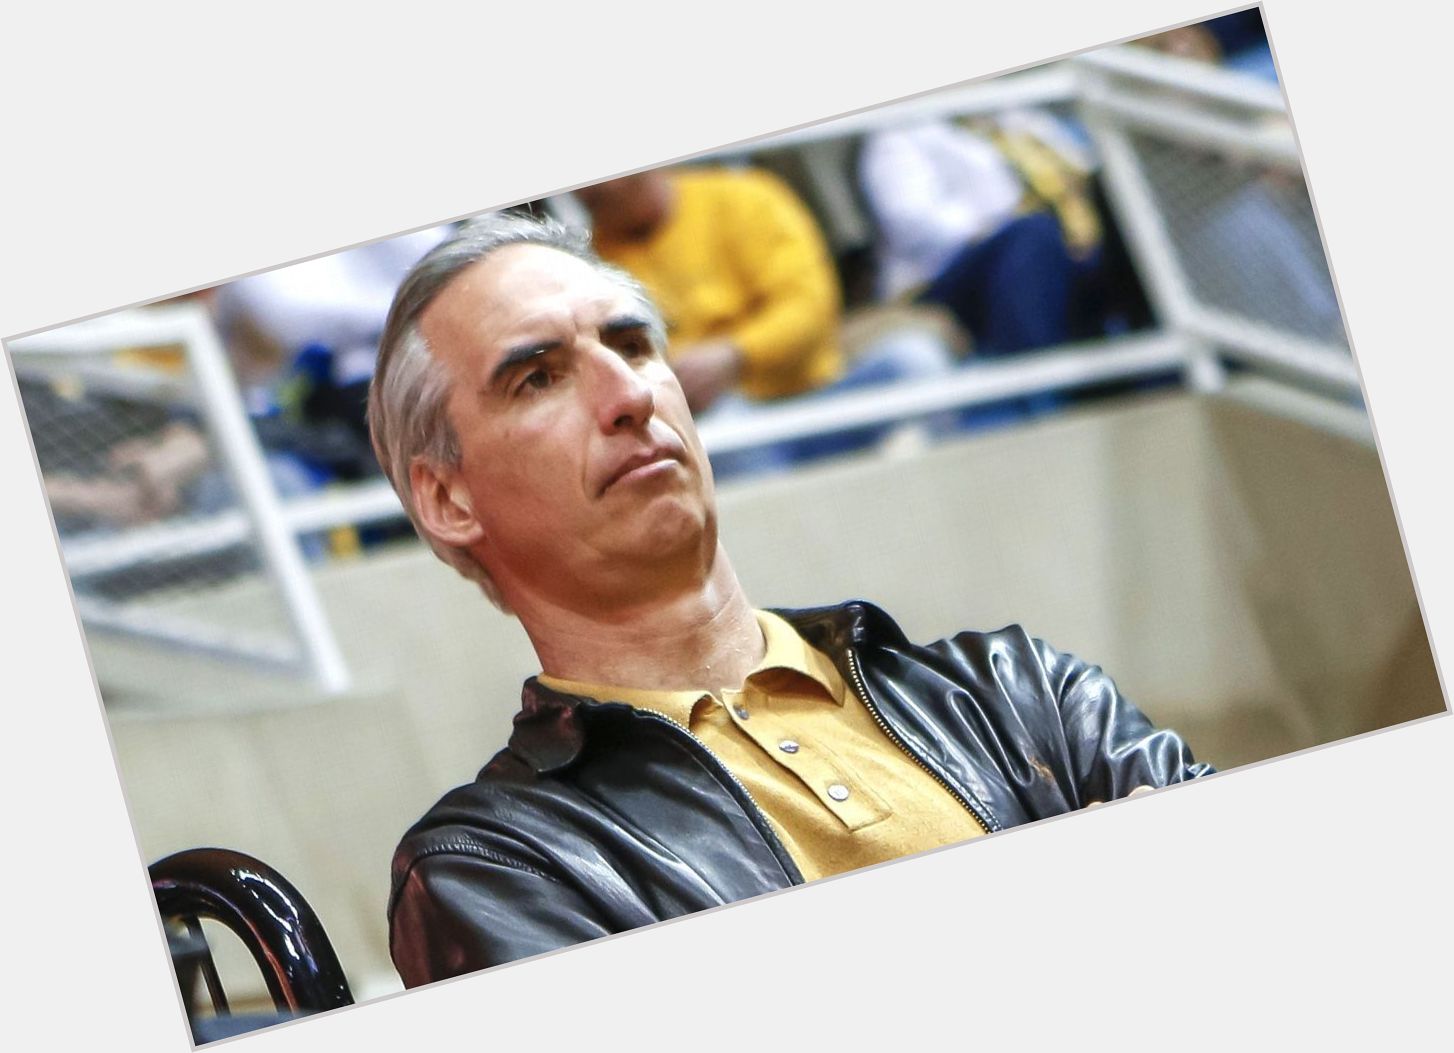 Https://fanpagepress.net/m/O/Oliver Luck New Pic 3